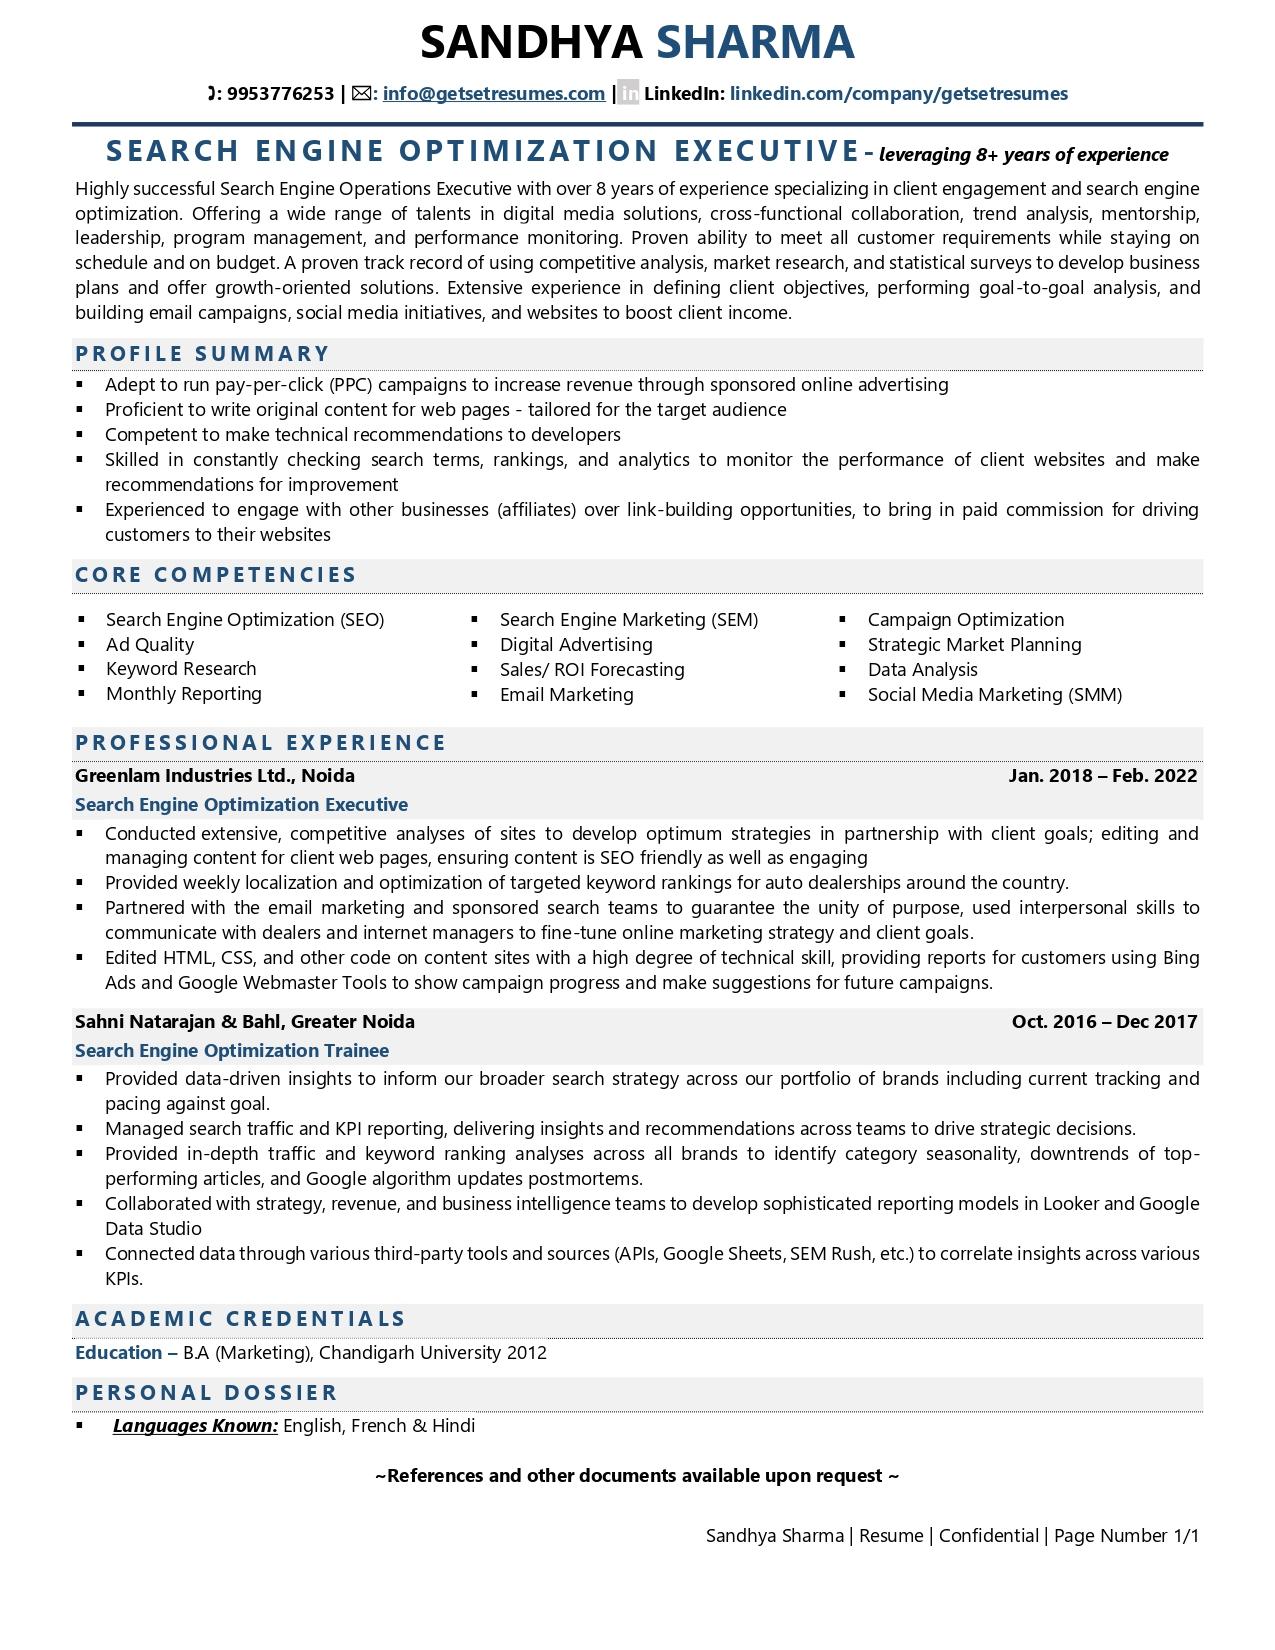 Search Engine Optimization Executive - Resume Example & Template